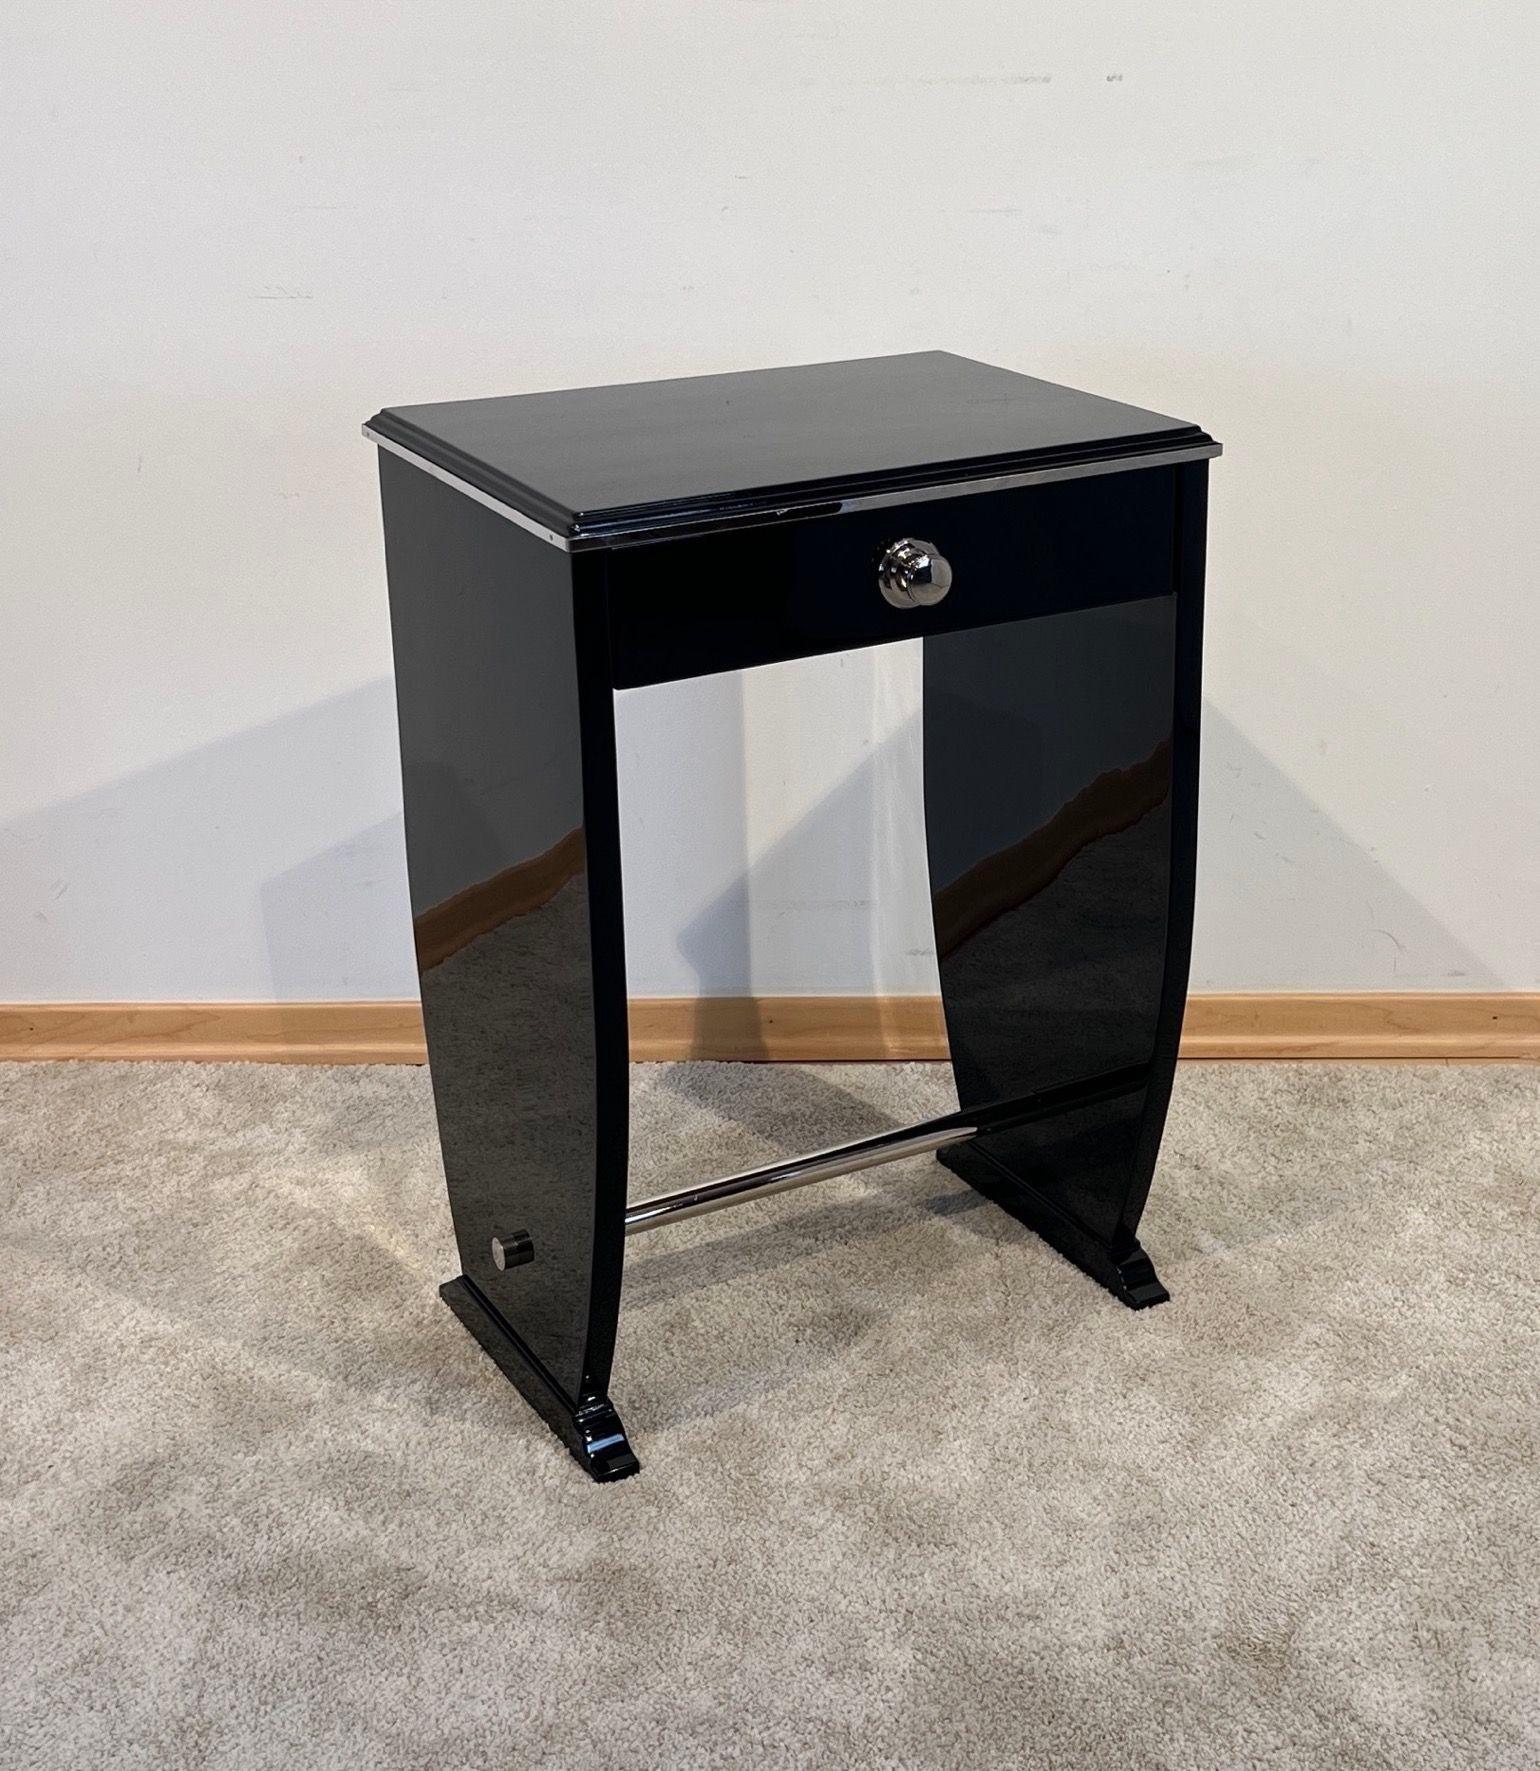 Blackened Art Deco Side Table with Drawer, Black Lacquer and Chrome, France circa 1930 For Sale